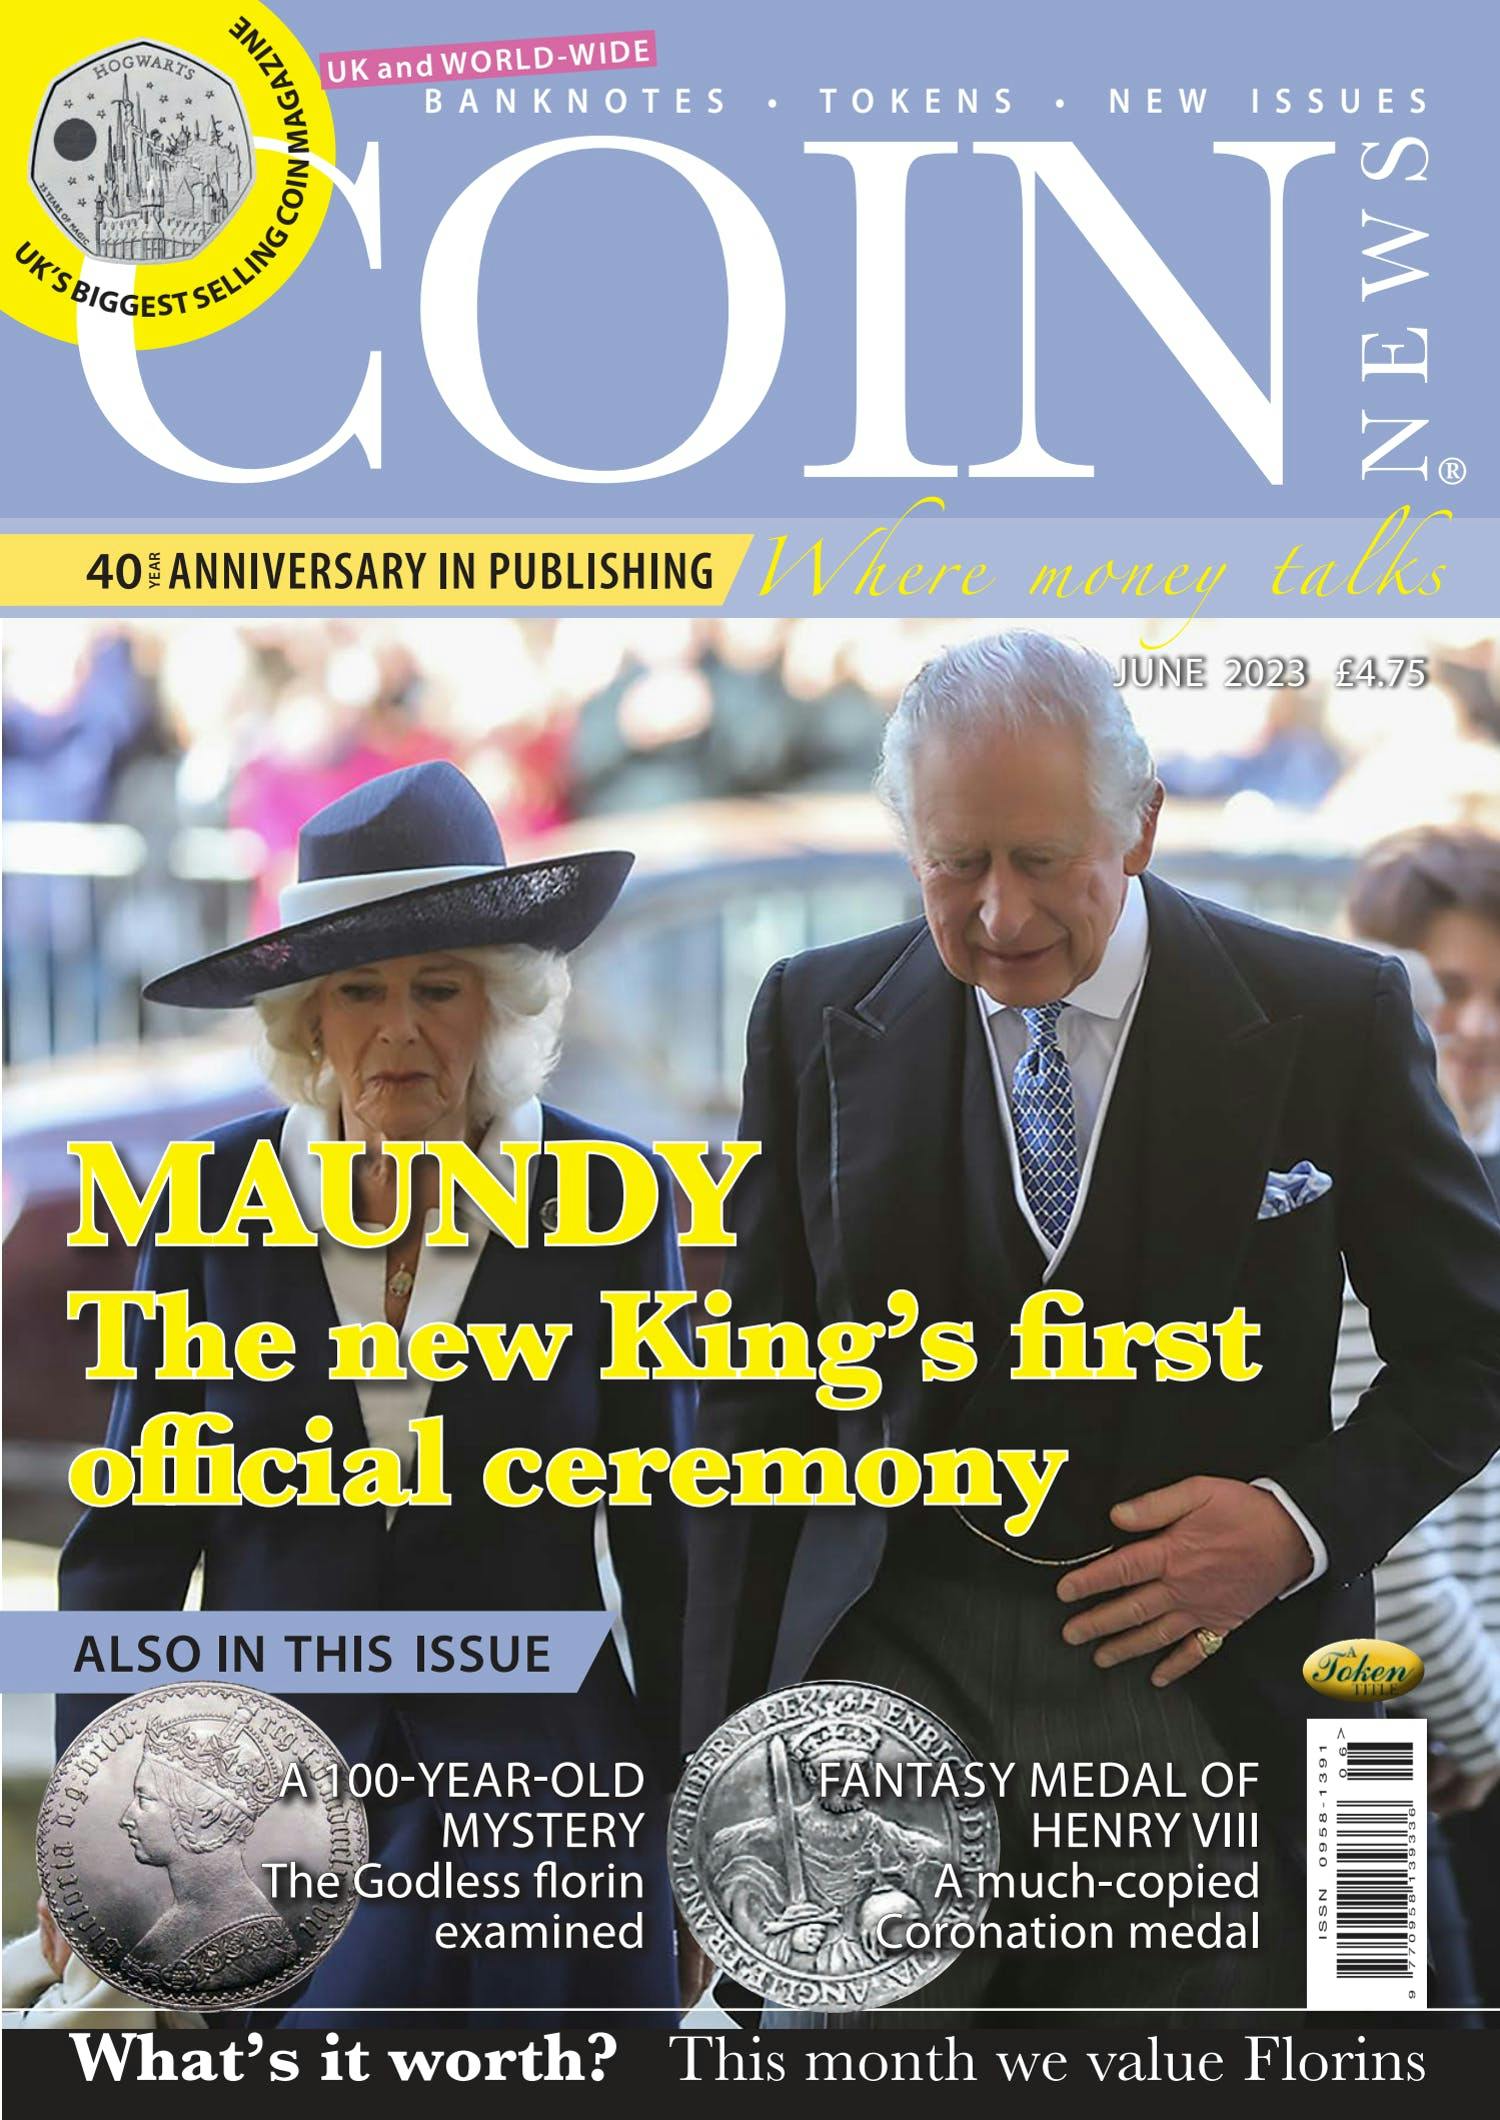 The front cover of Coin News, Volume 60, Number 6, June 2023